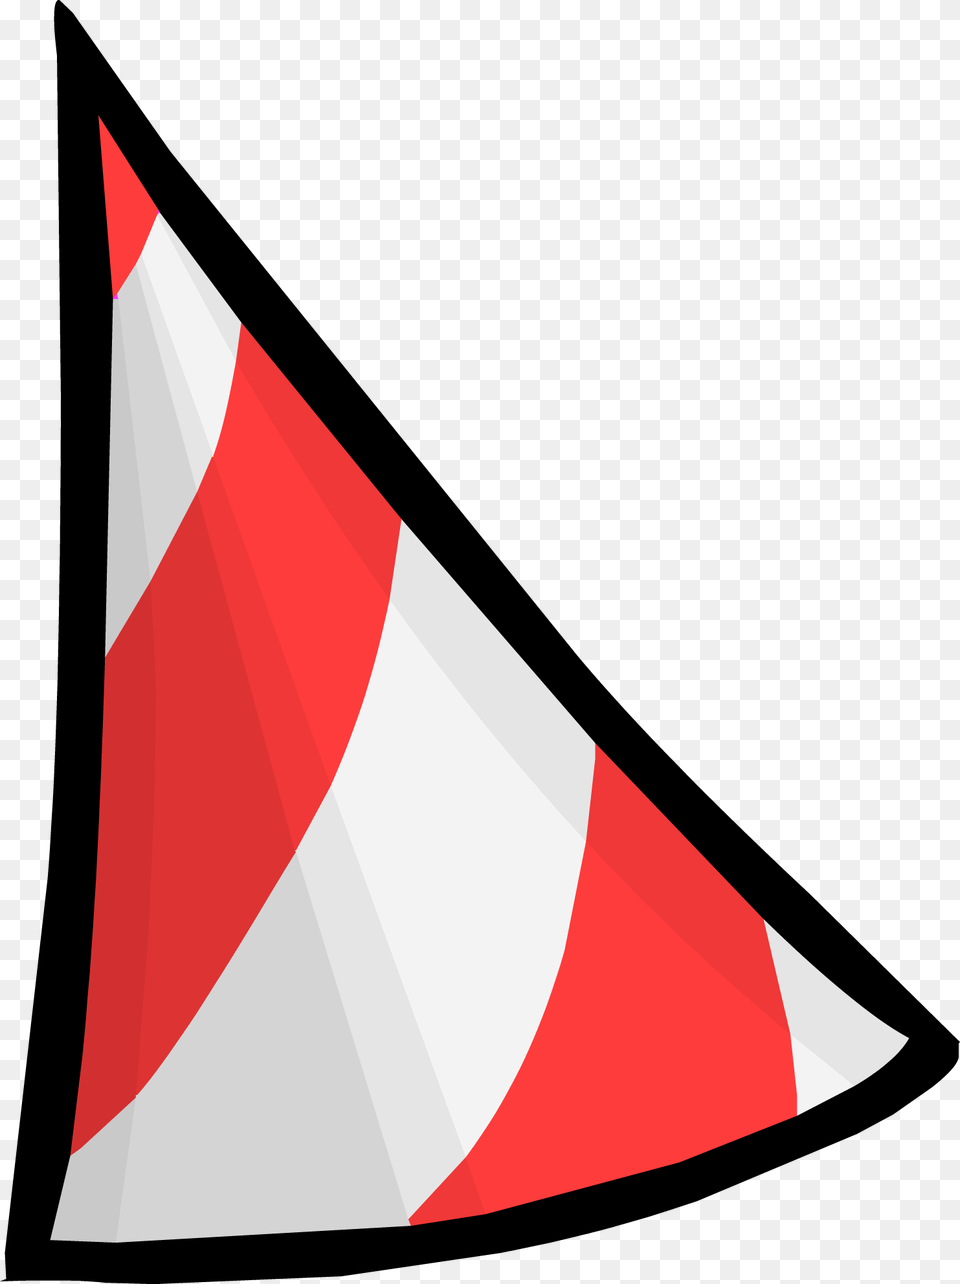 Club Penguin Rewritten Wiki Flag, Cone, Rocket, Triangle, Weapon Png